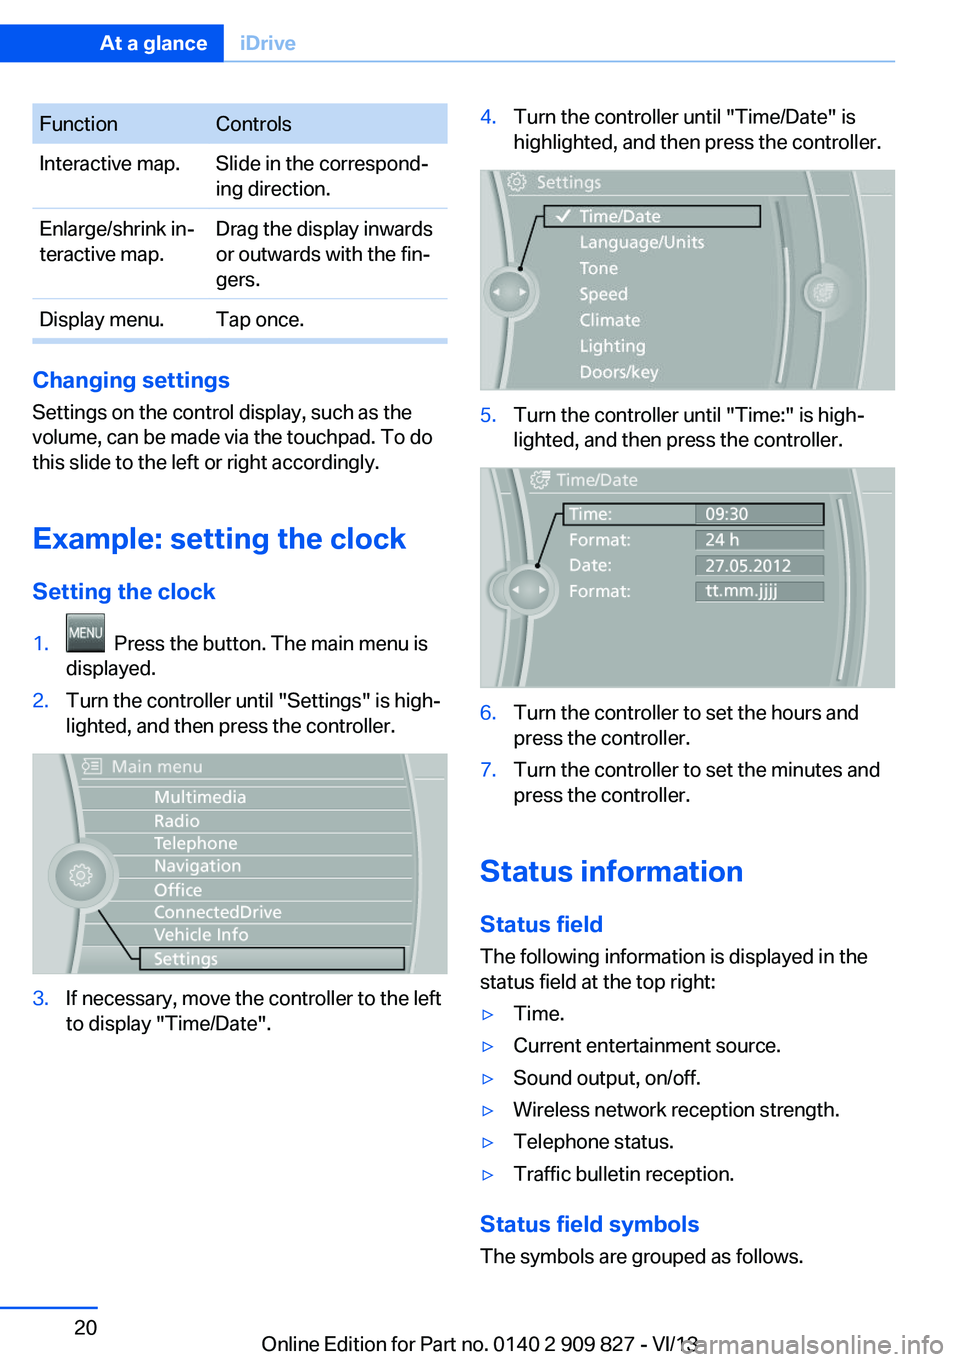 BMW 428I COUPE 2014  Owners Manual FunctionControlsInteractive map.Slide in the correspond‐
ing direction.Enlarge/shrink in‐
teractive map.Drag the display inwards
or outwards with the fin‐
gers.Display menu.Tap once.
Changing se